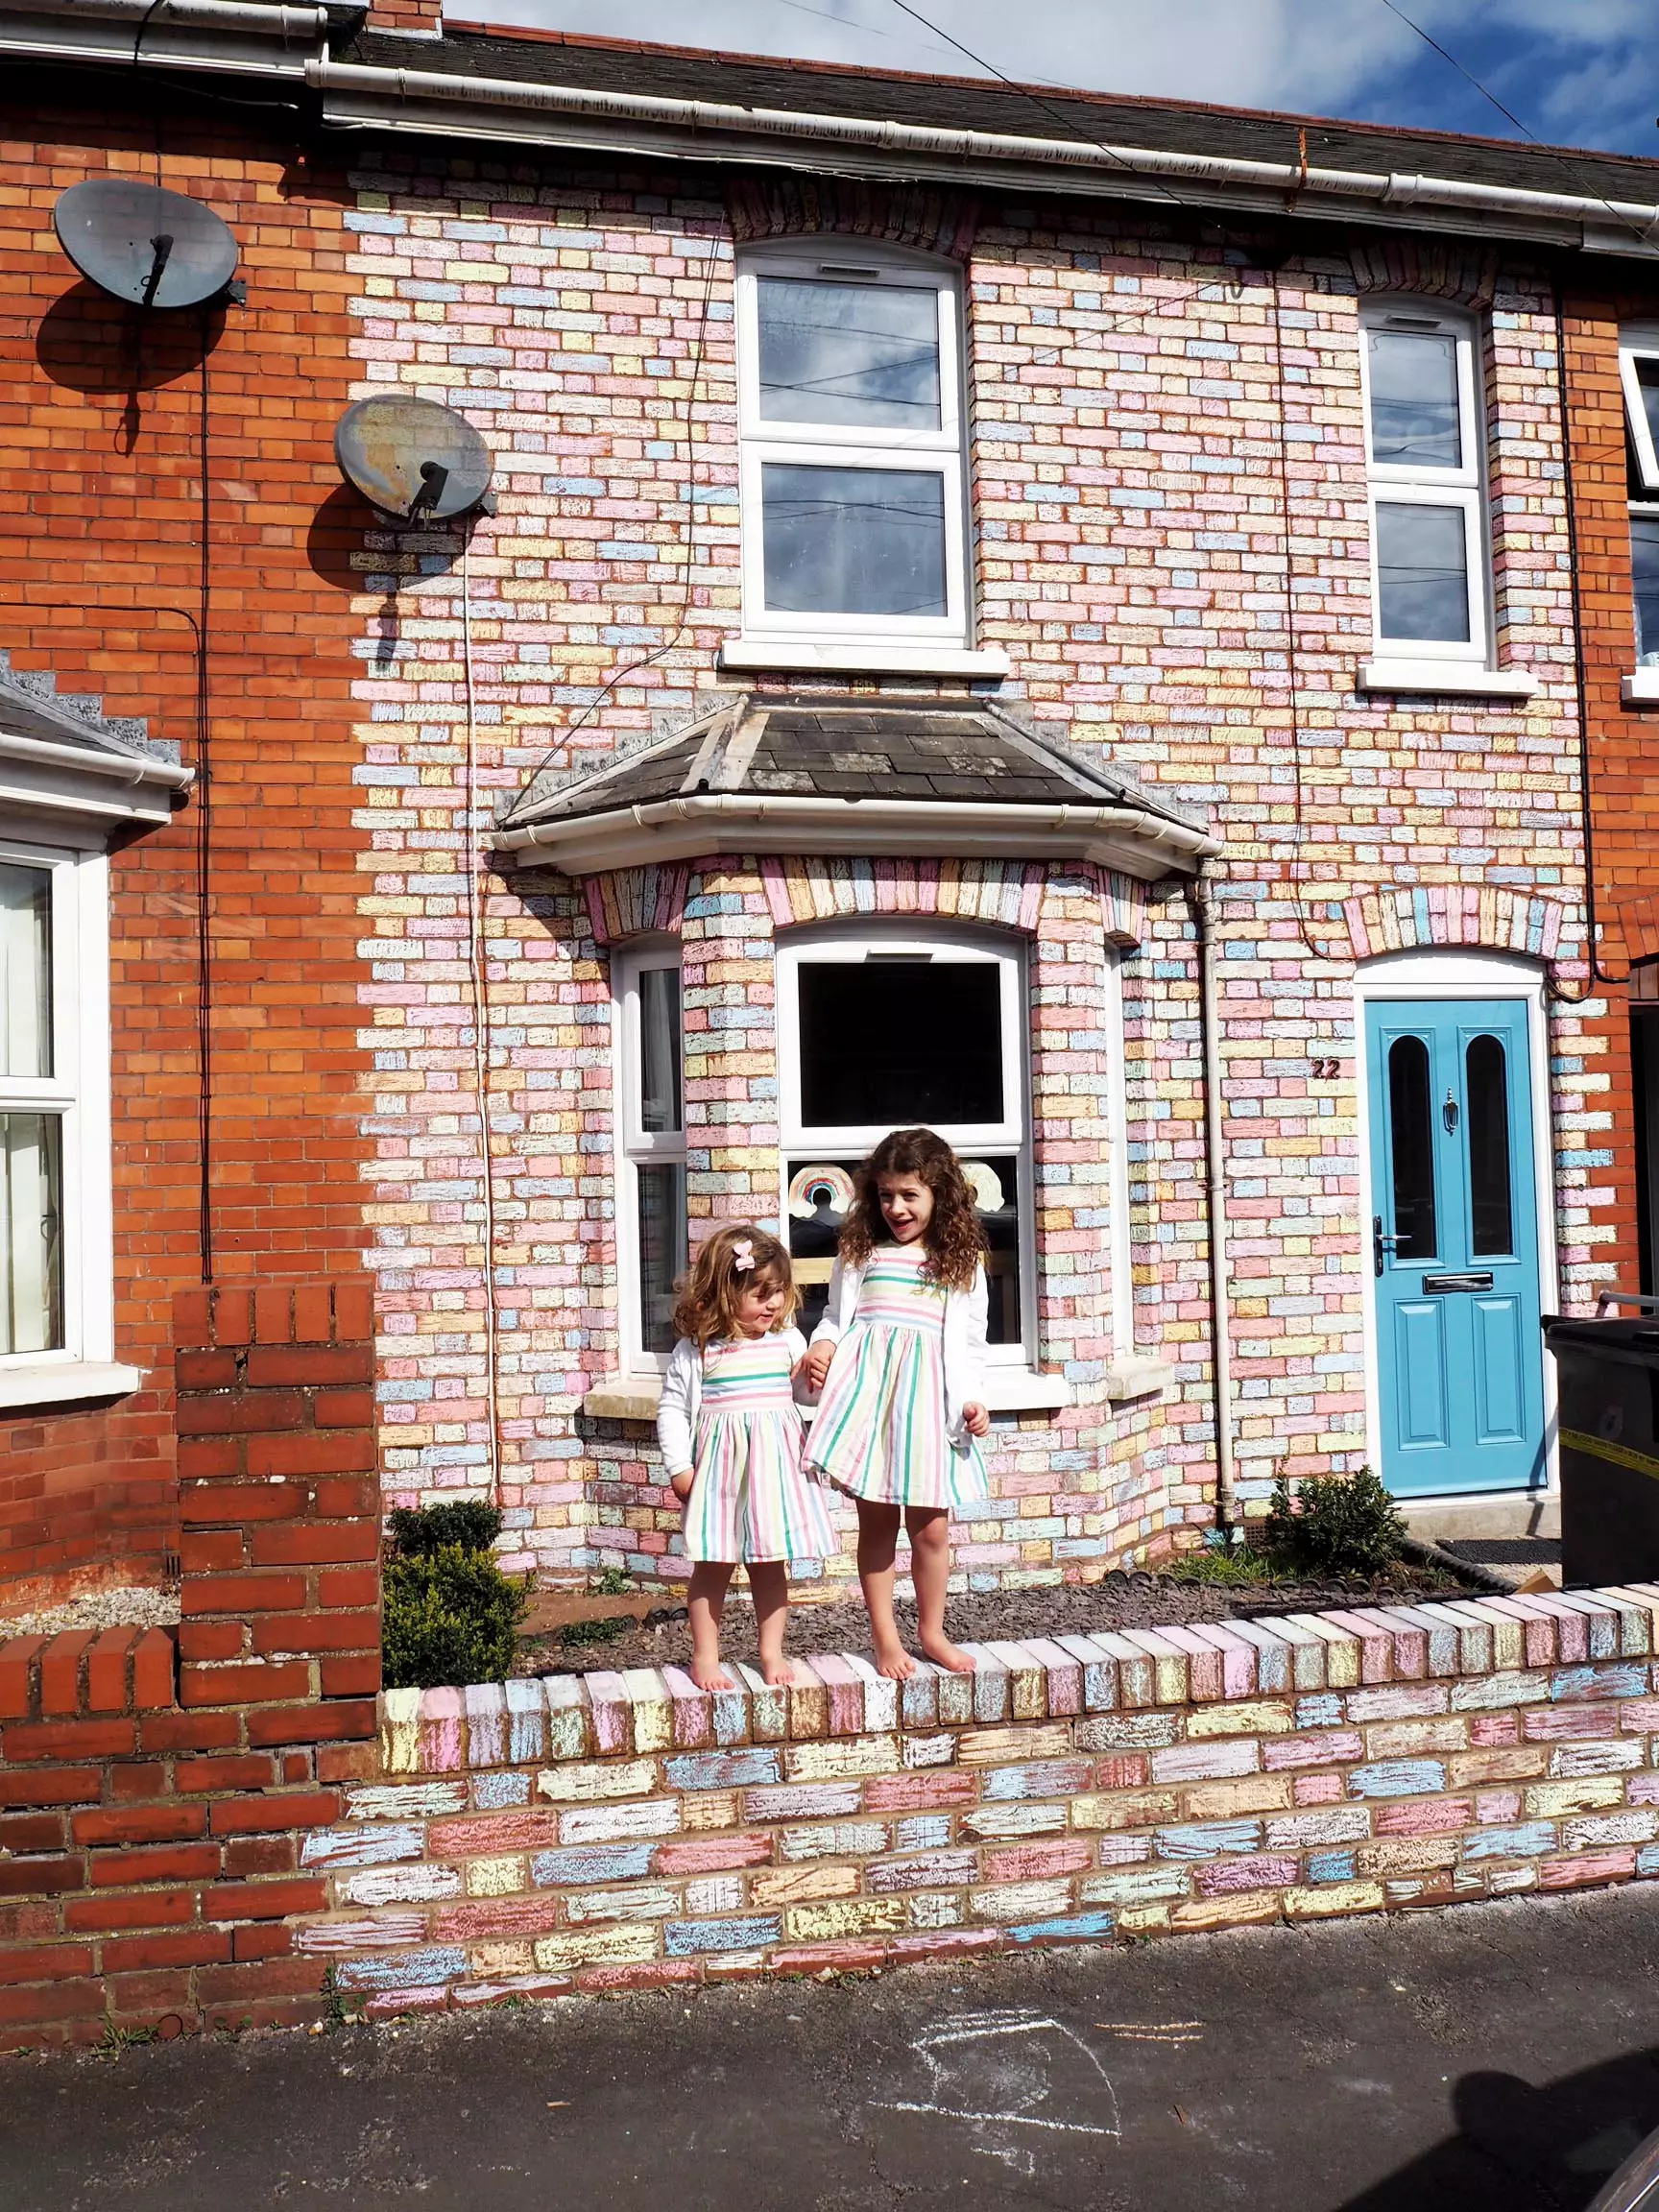 Arabella and Matilda spent hours colouring in the bricks (